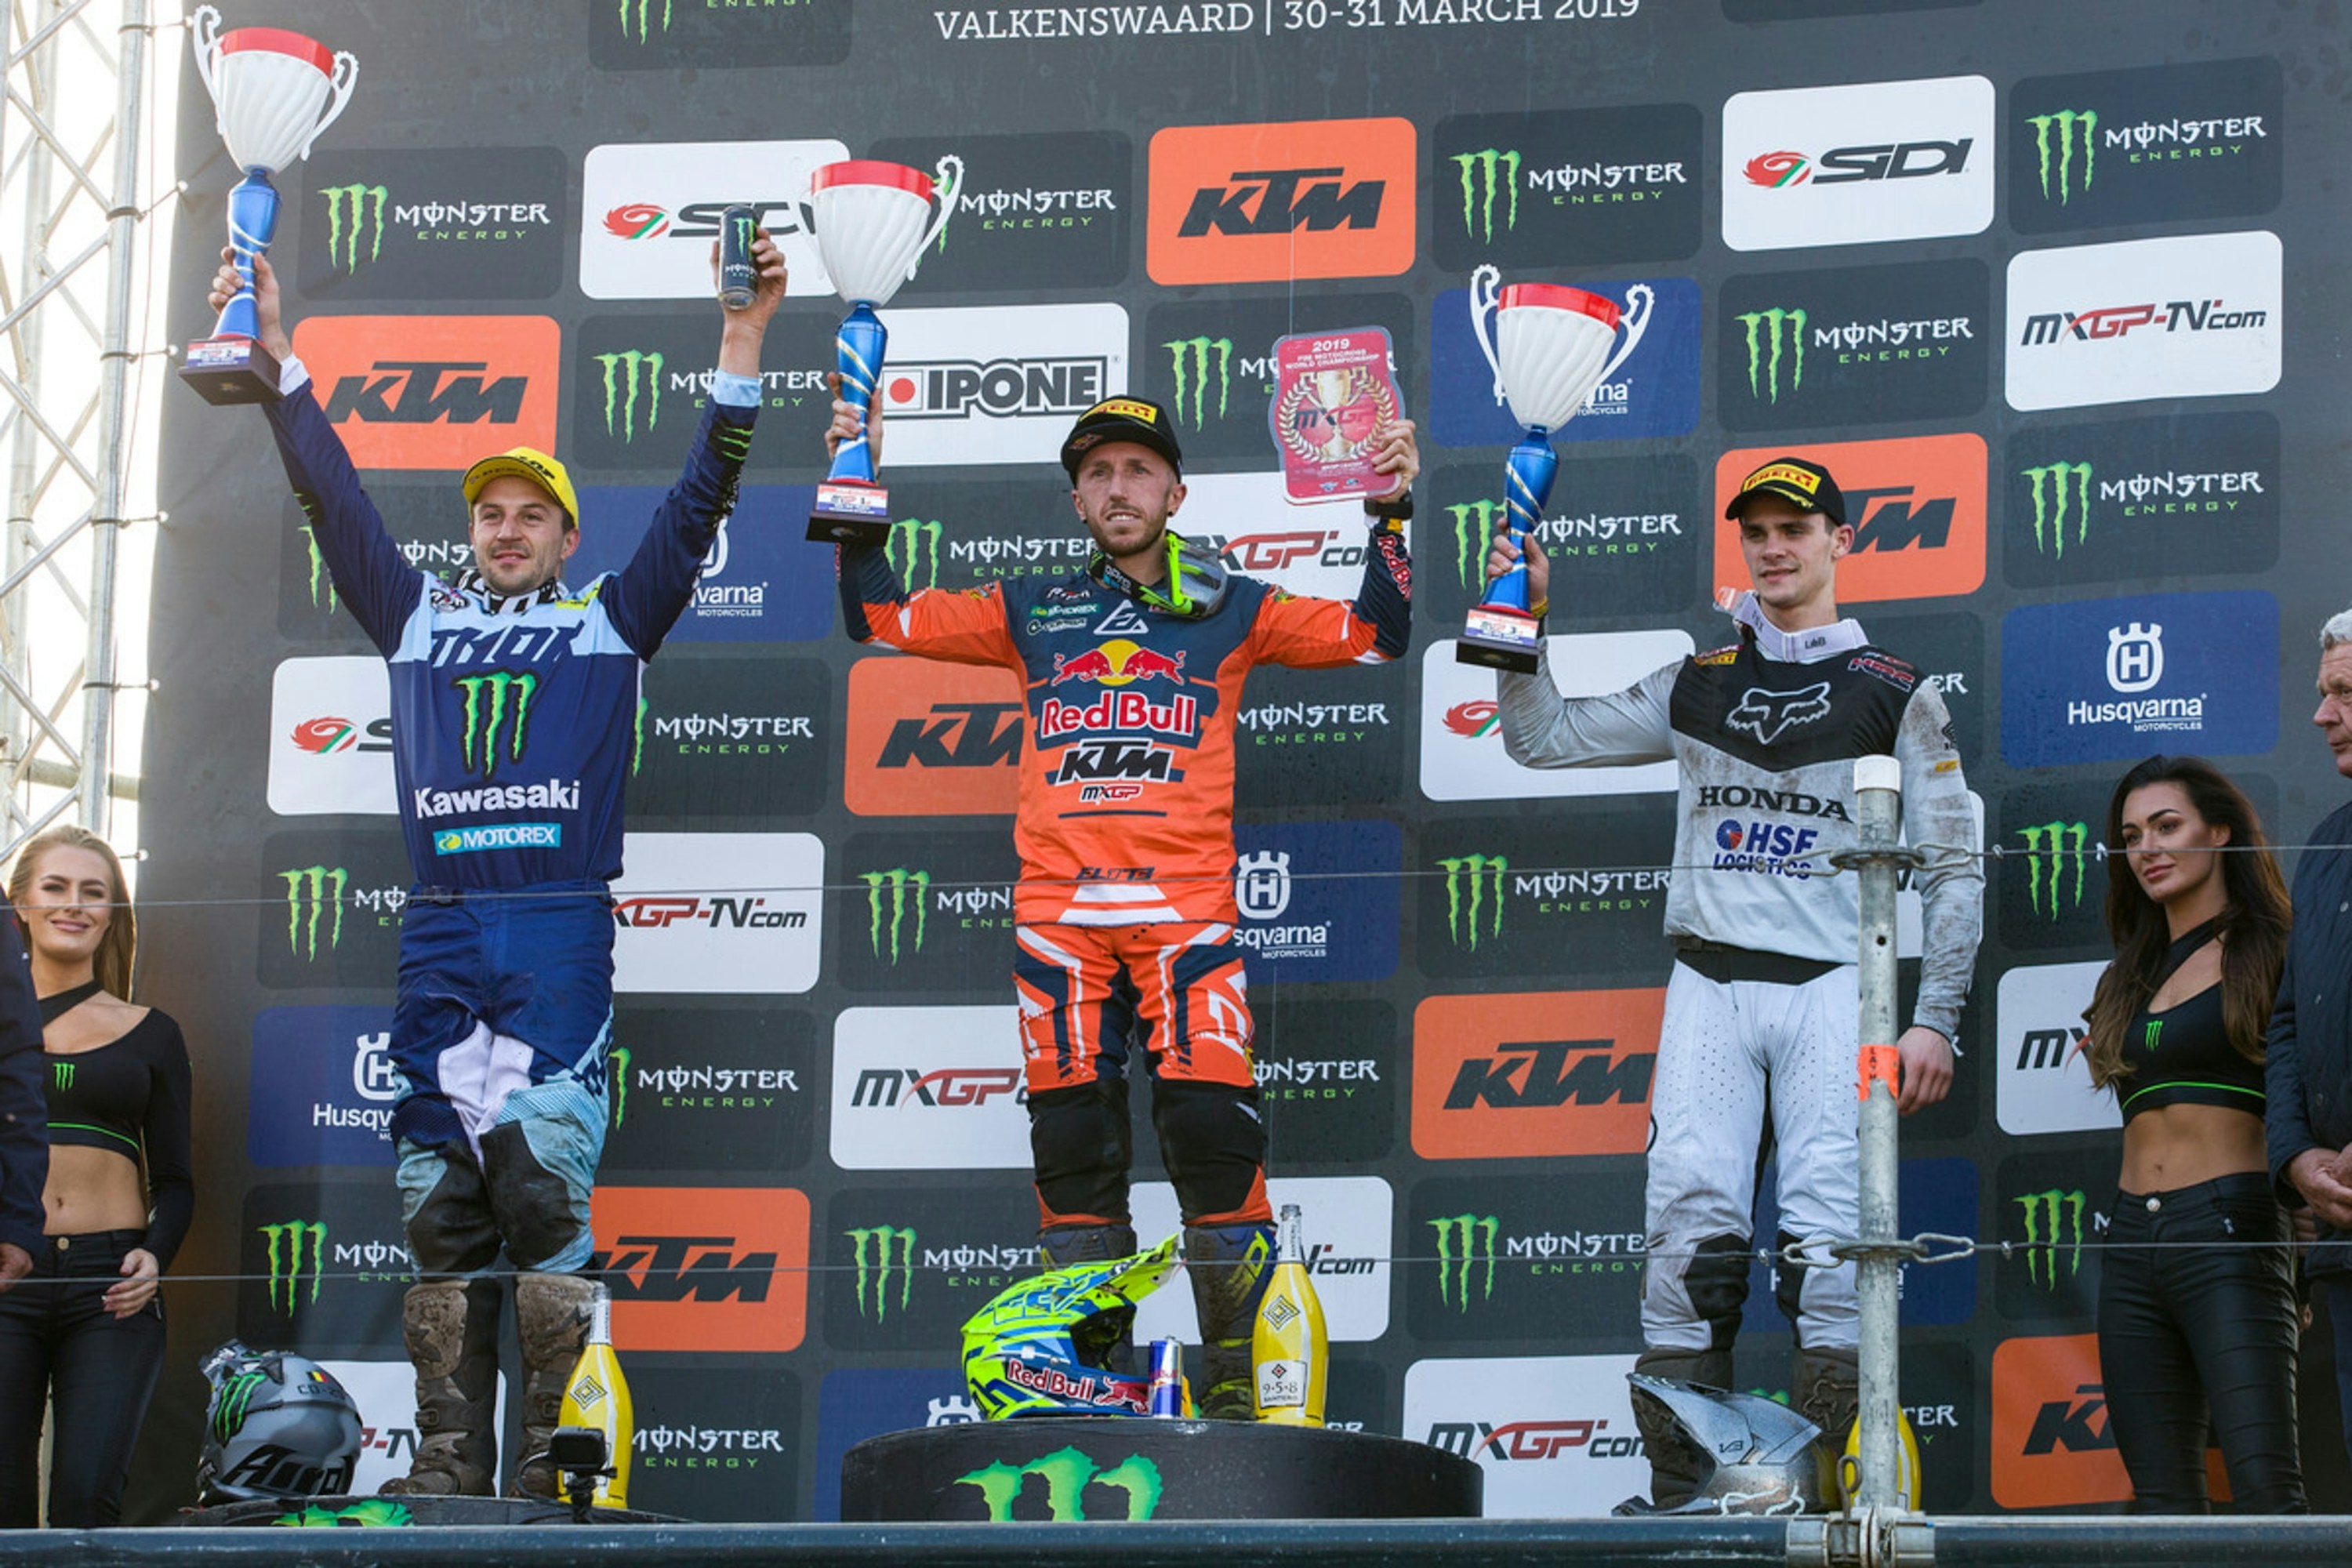 4 Things We Learned at the 2019 MXGP of The Netherlands - Racer X